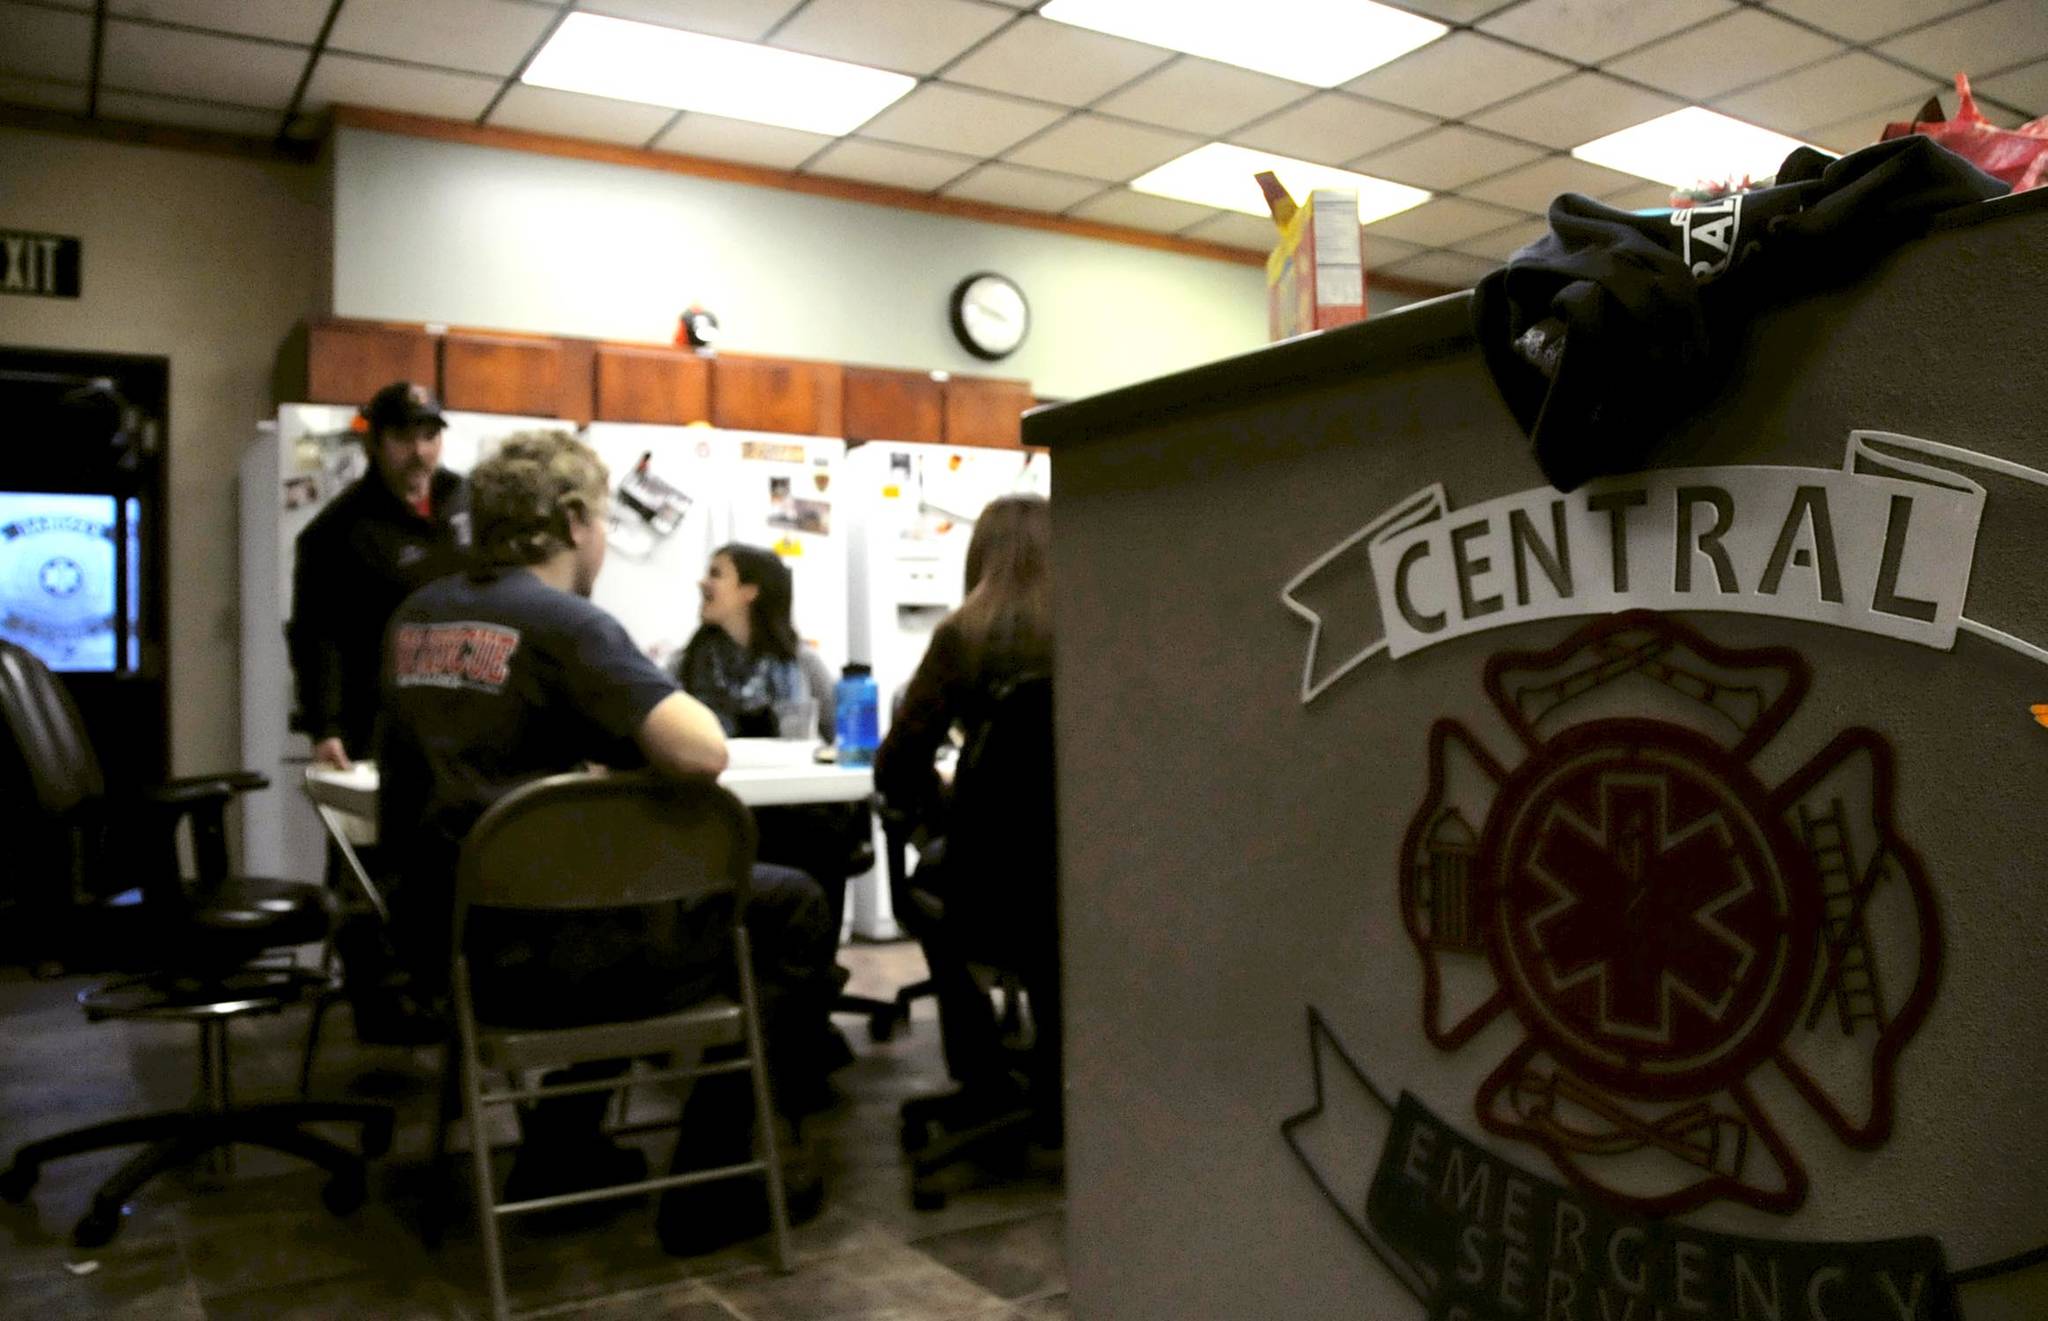 In this Dec. 25, 2015 file photo, Central Emergency Services employees and volunteers and their families gather for a Christmas Day potluck at Station 1 in Soldotna, Alaska. The central station, which handles the majority of the calls for the fire and emergency service area, was originally built in 1957 and last renovated in 1981. The service area is now seeking state funding to reconstruct or relocate the station. (Photo by Elizabeth Earl/Peninsula Clarion, file)